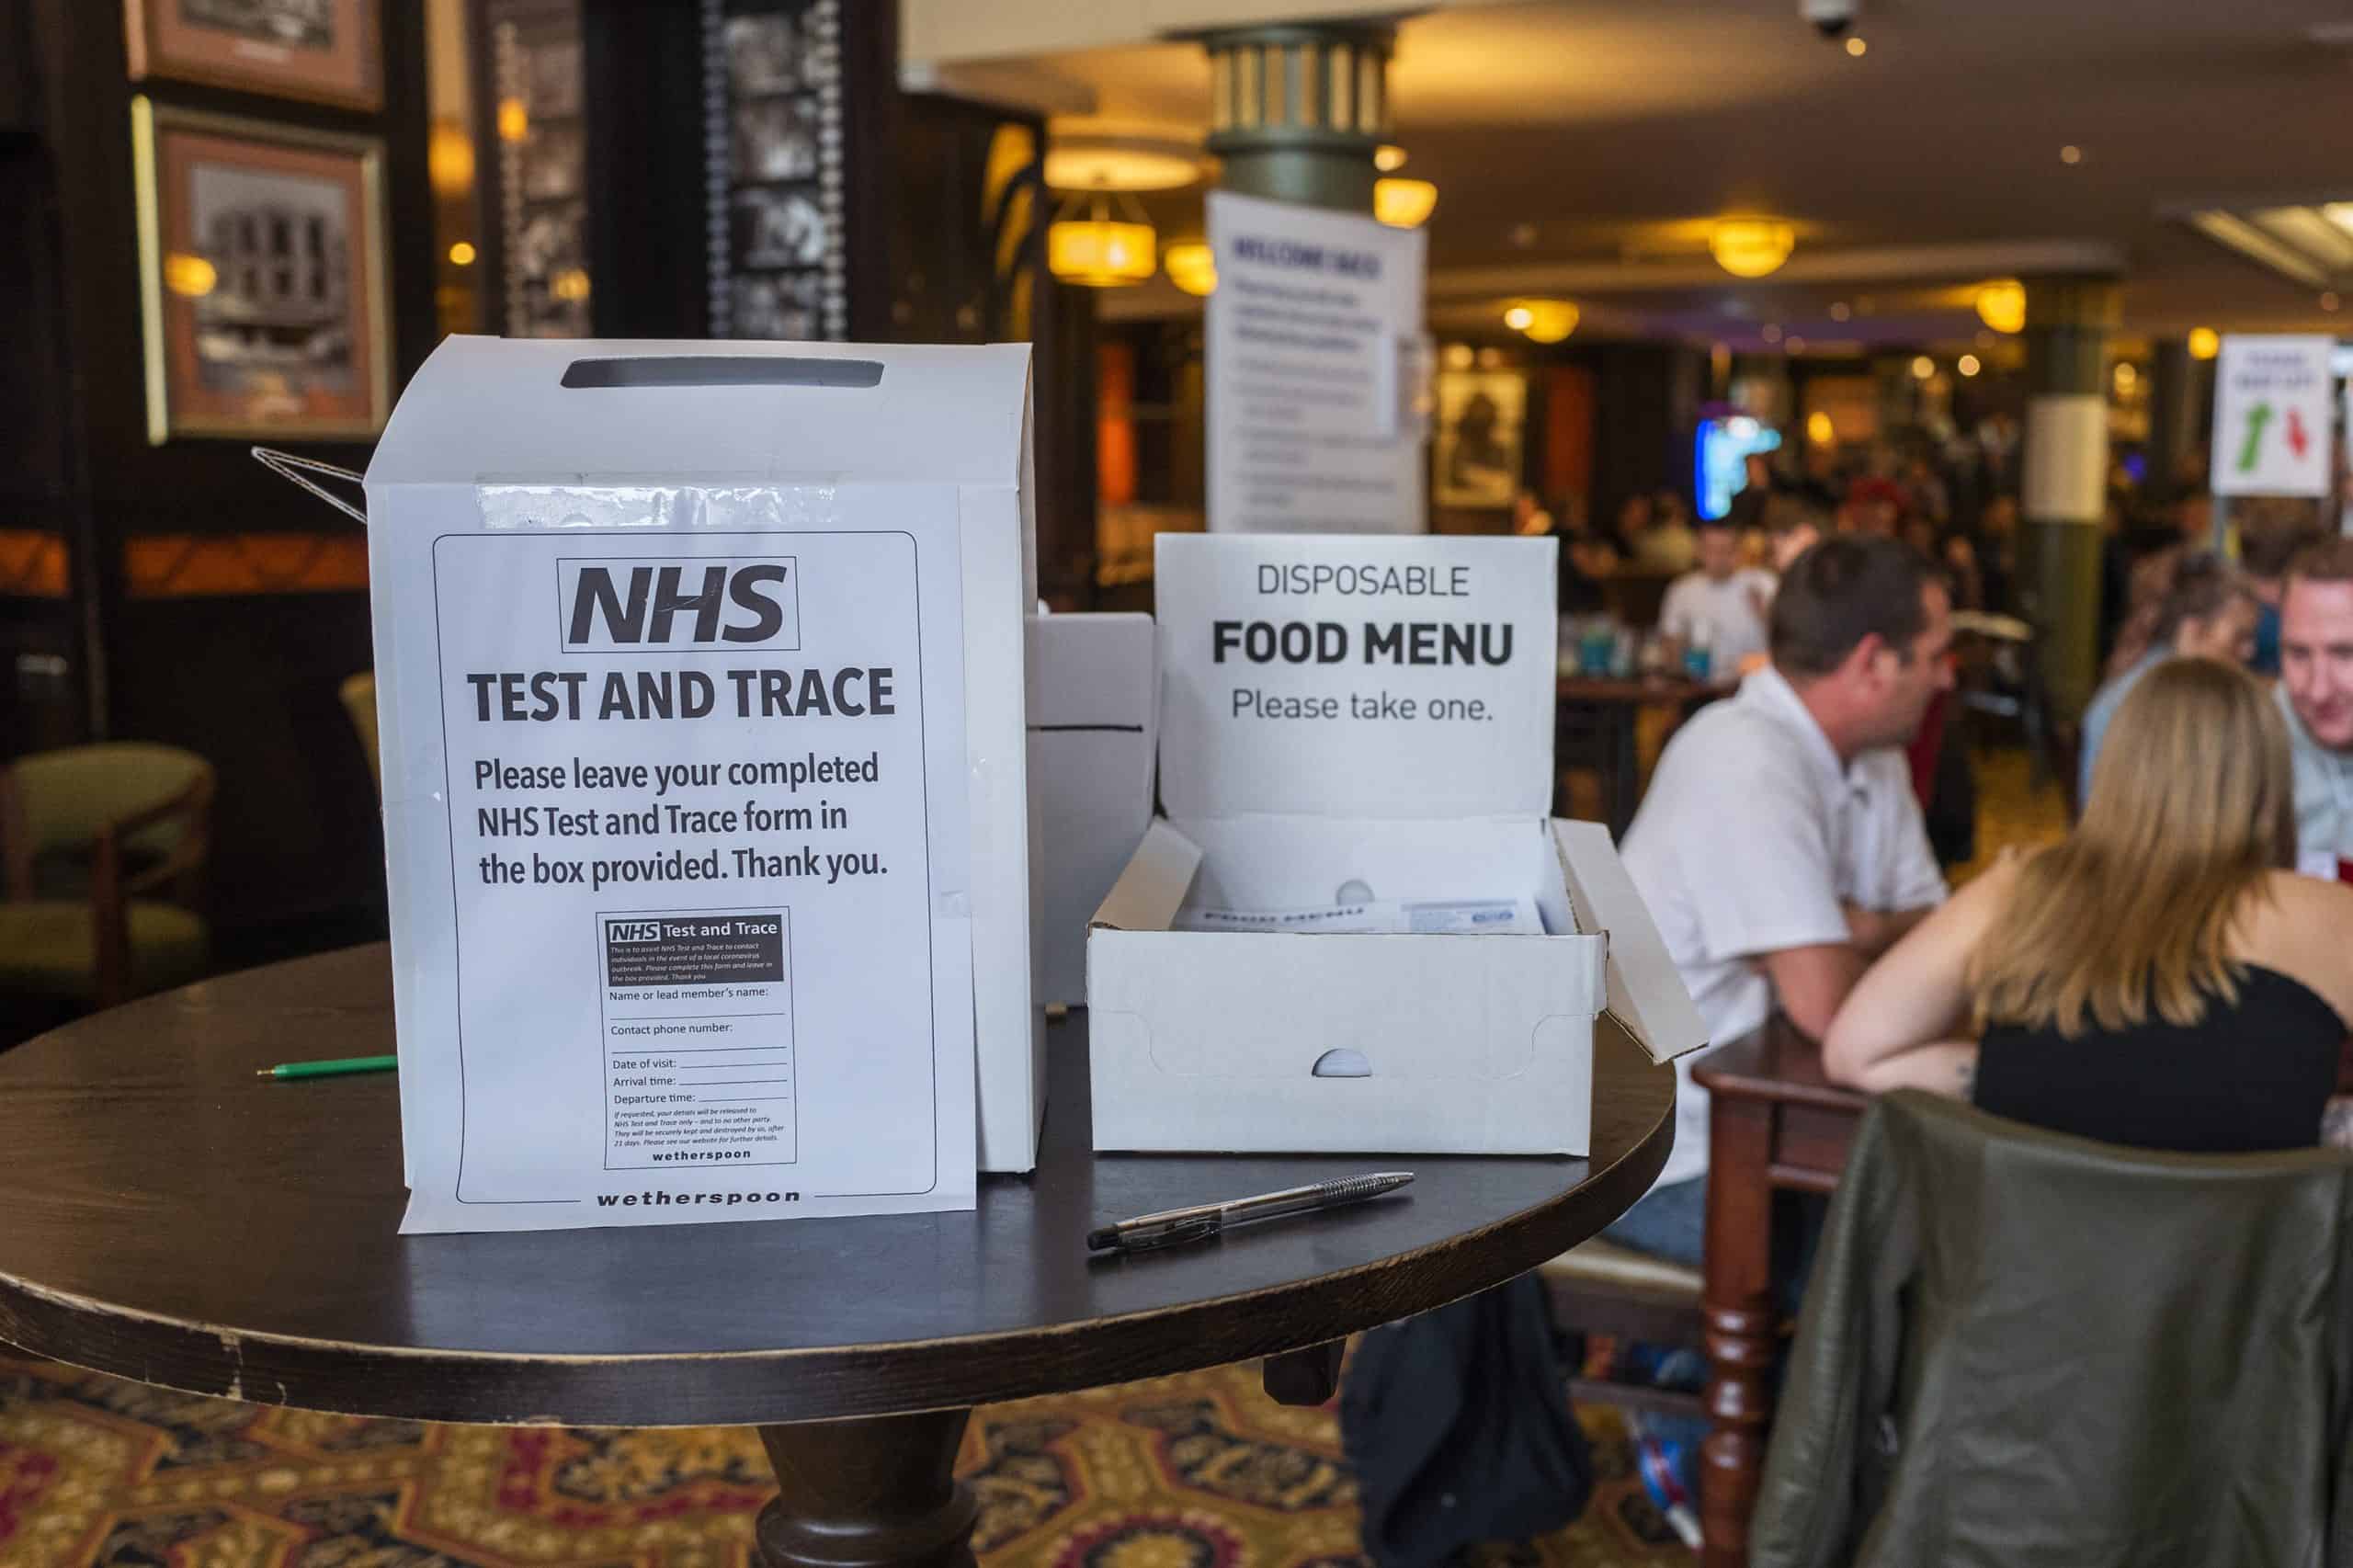 Image: An NHS Test and Trace box in a pub